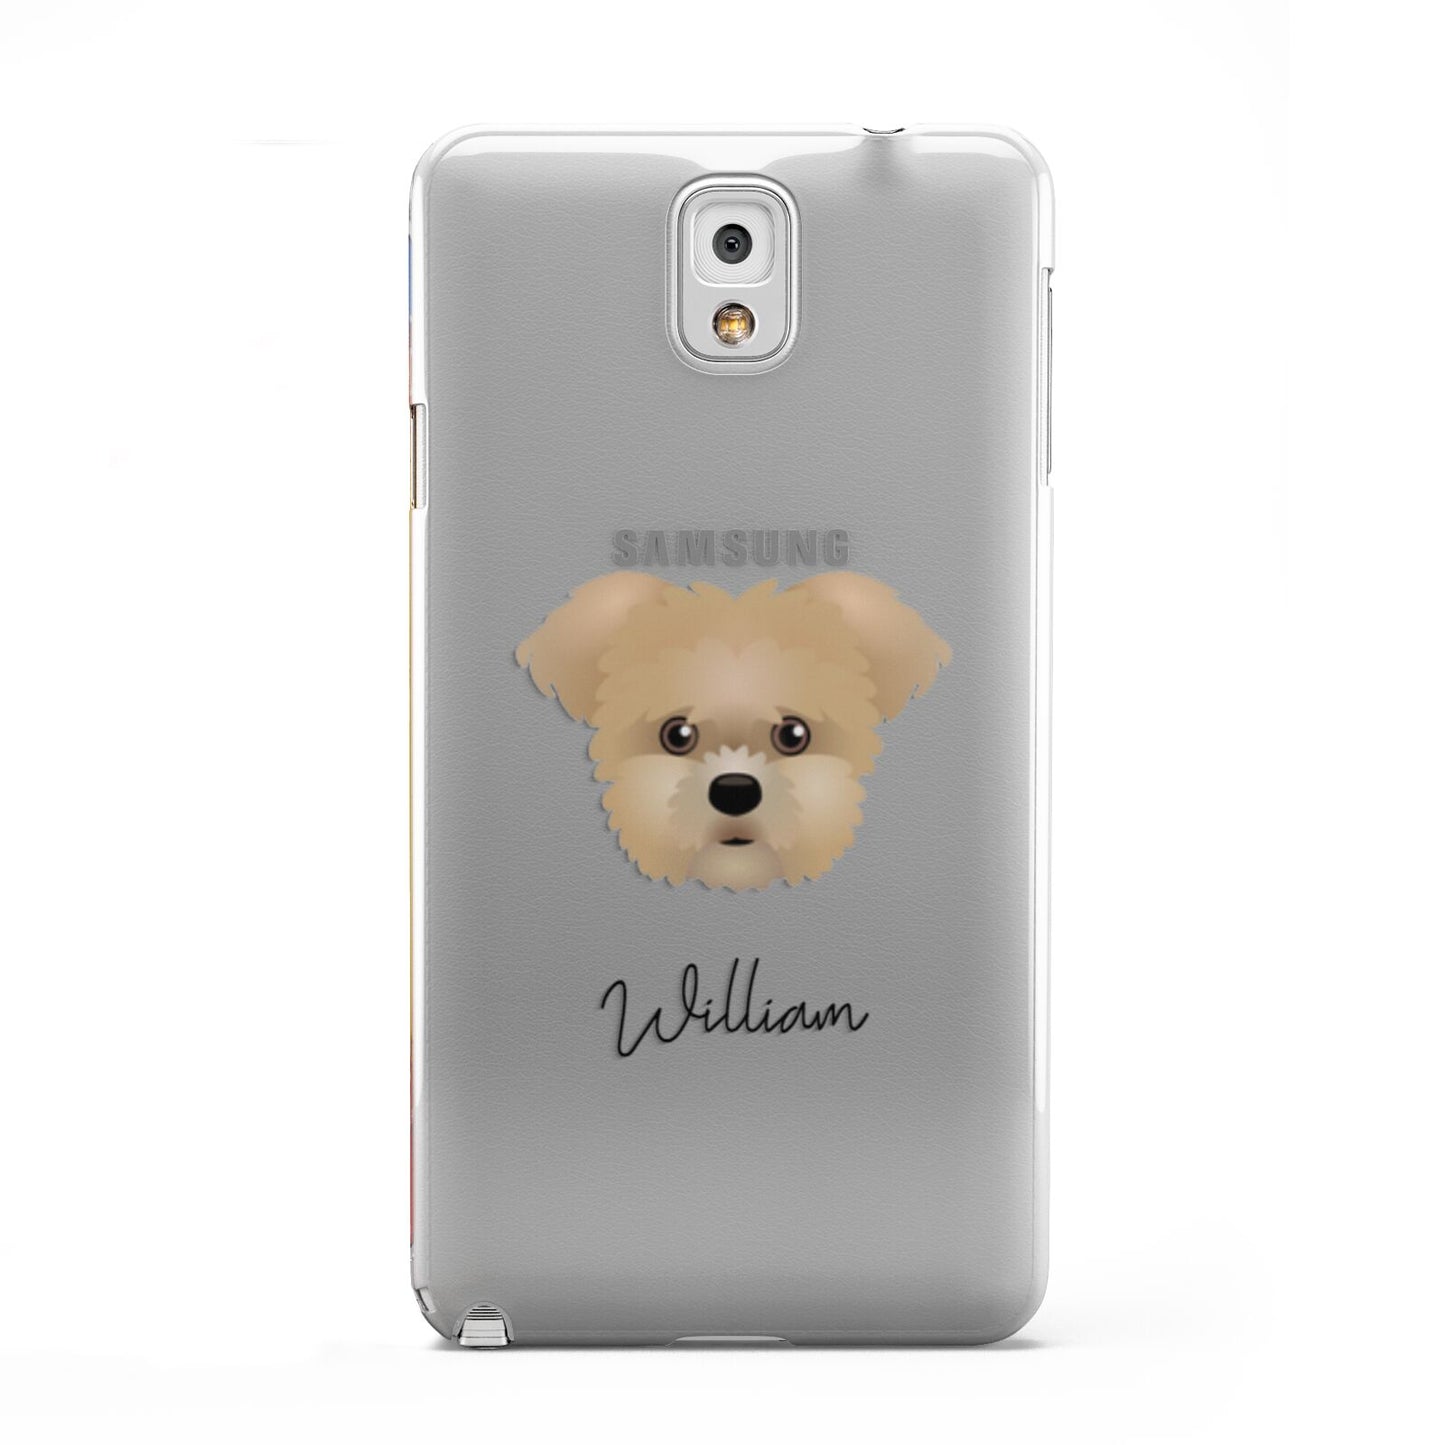 Morkie Personalised Samsung Galaxy Note 3 Case